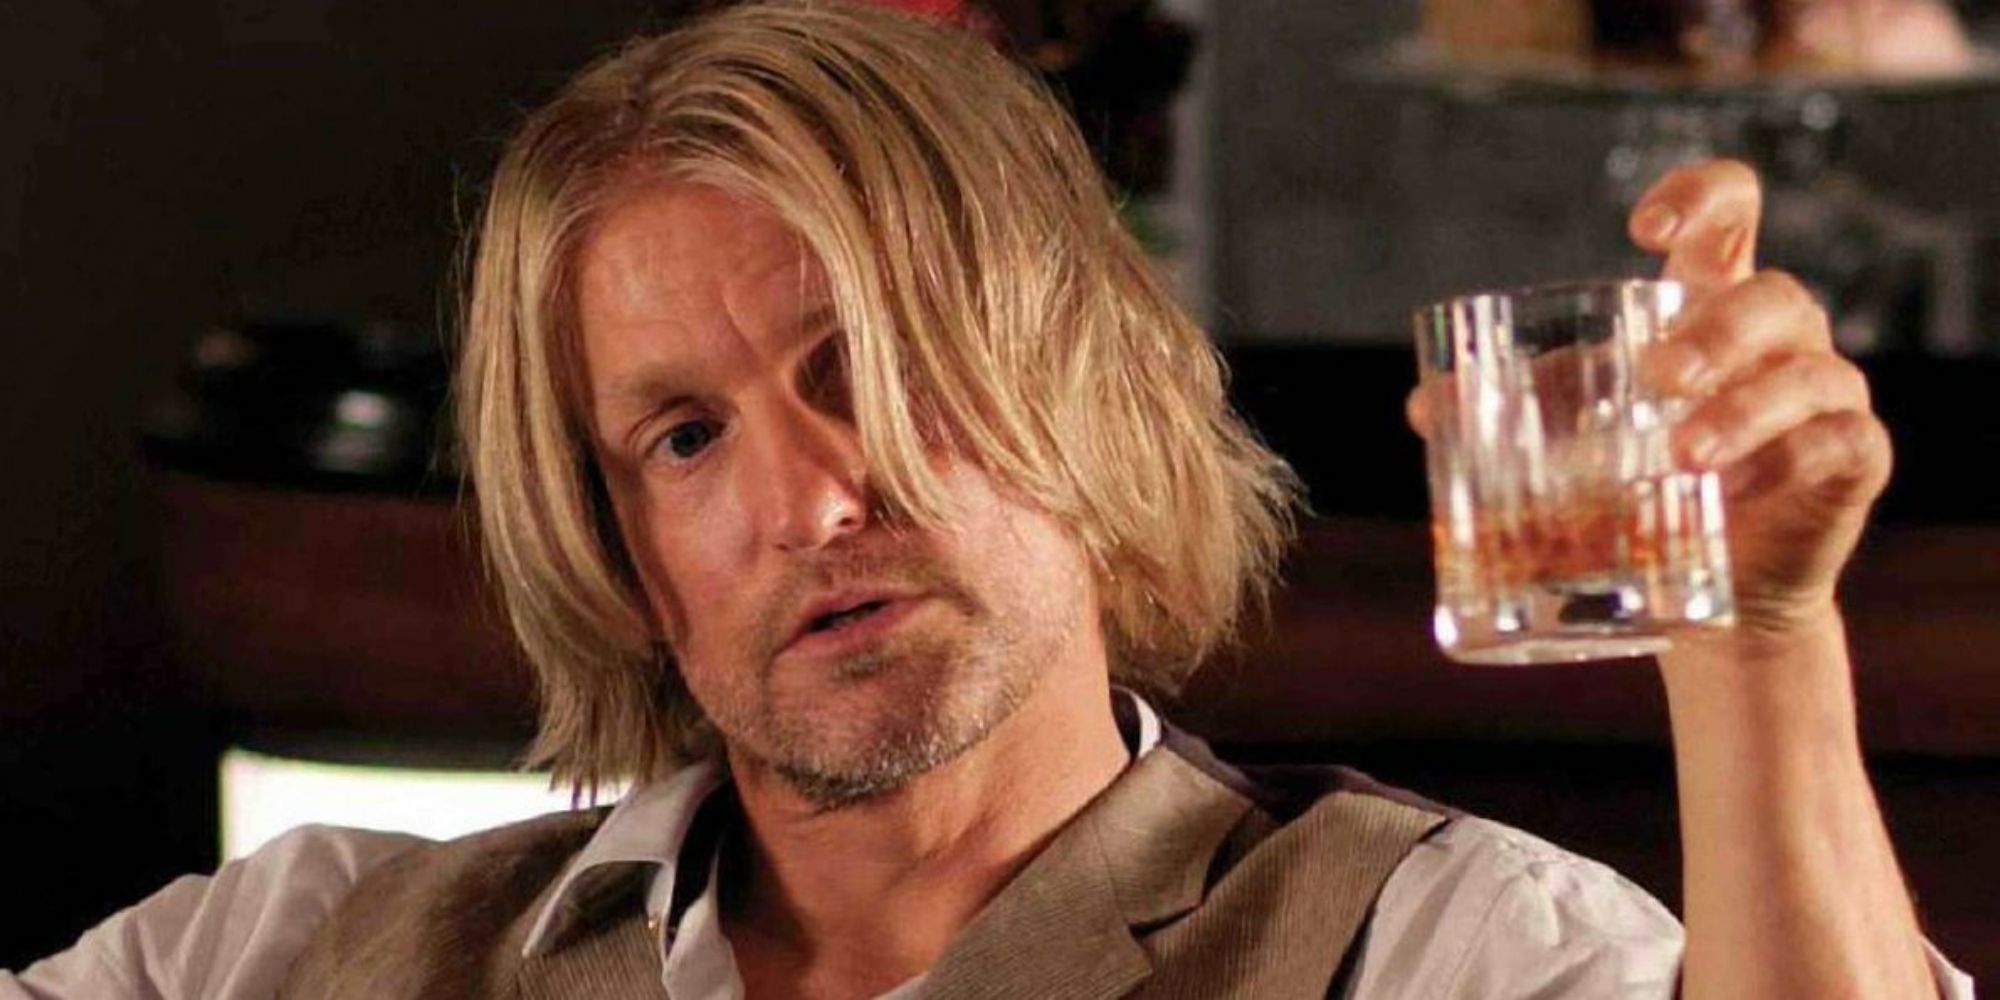 Haymitch holding a glass of alcohol in The Hunger Games